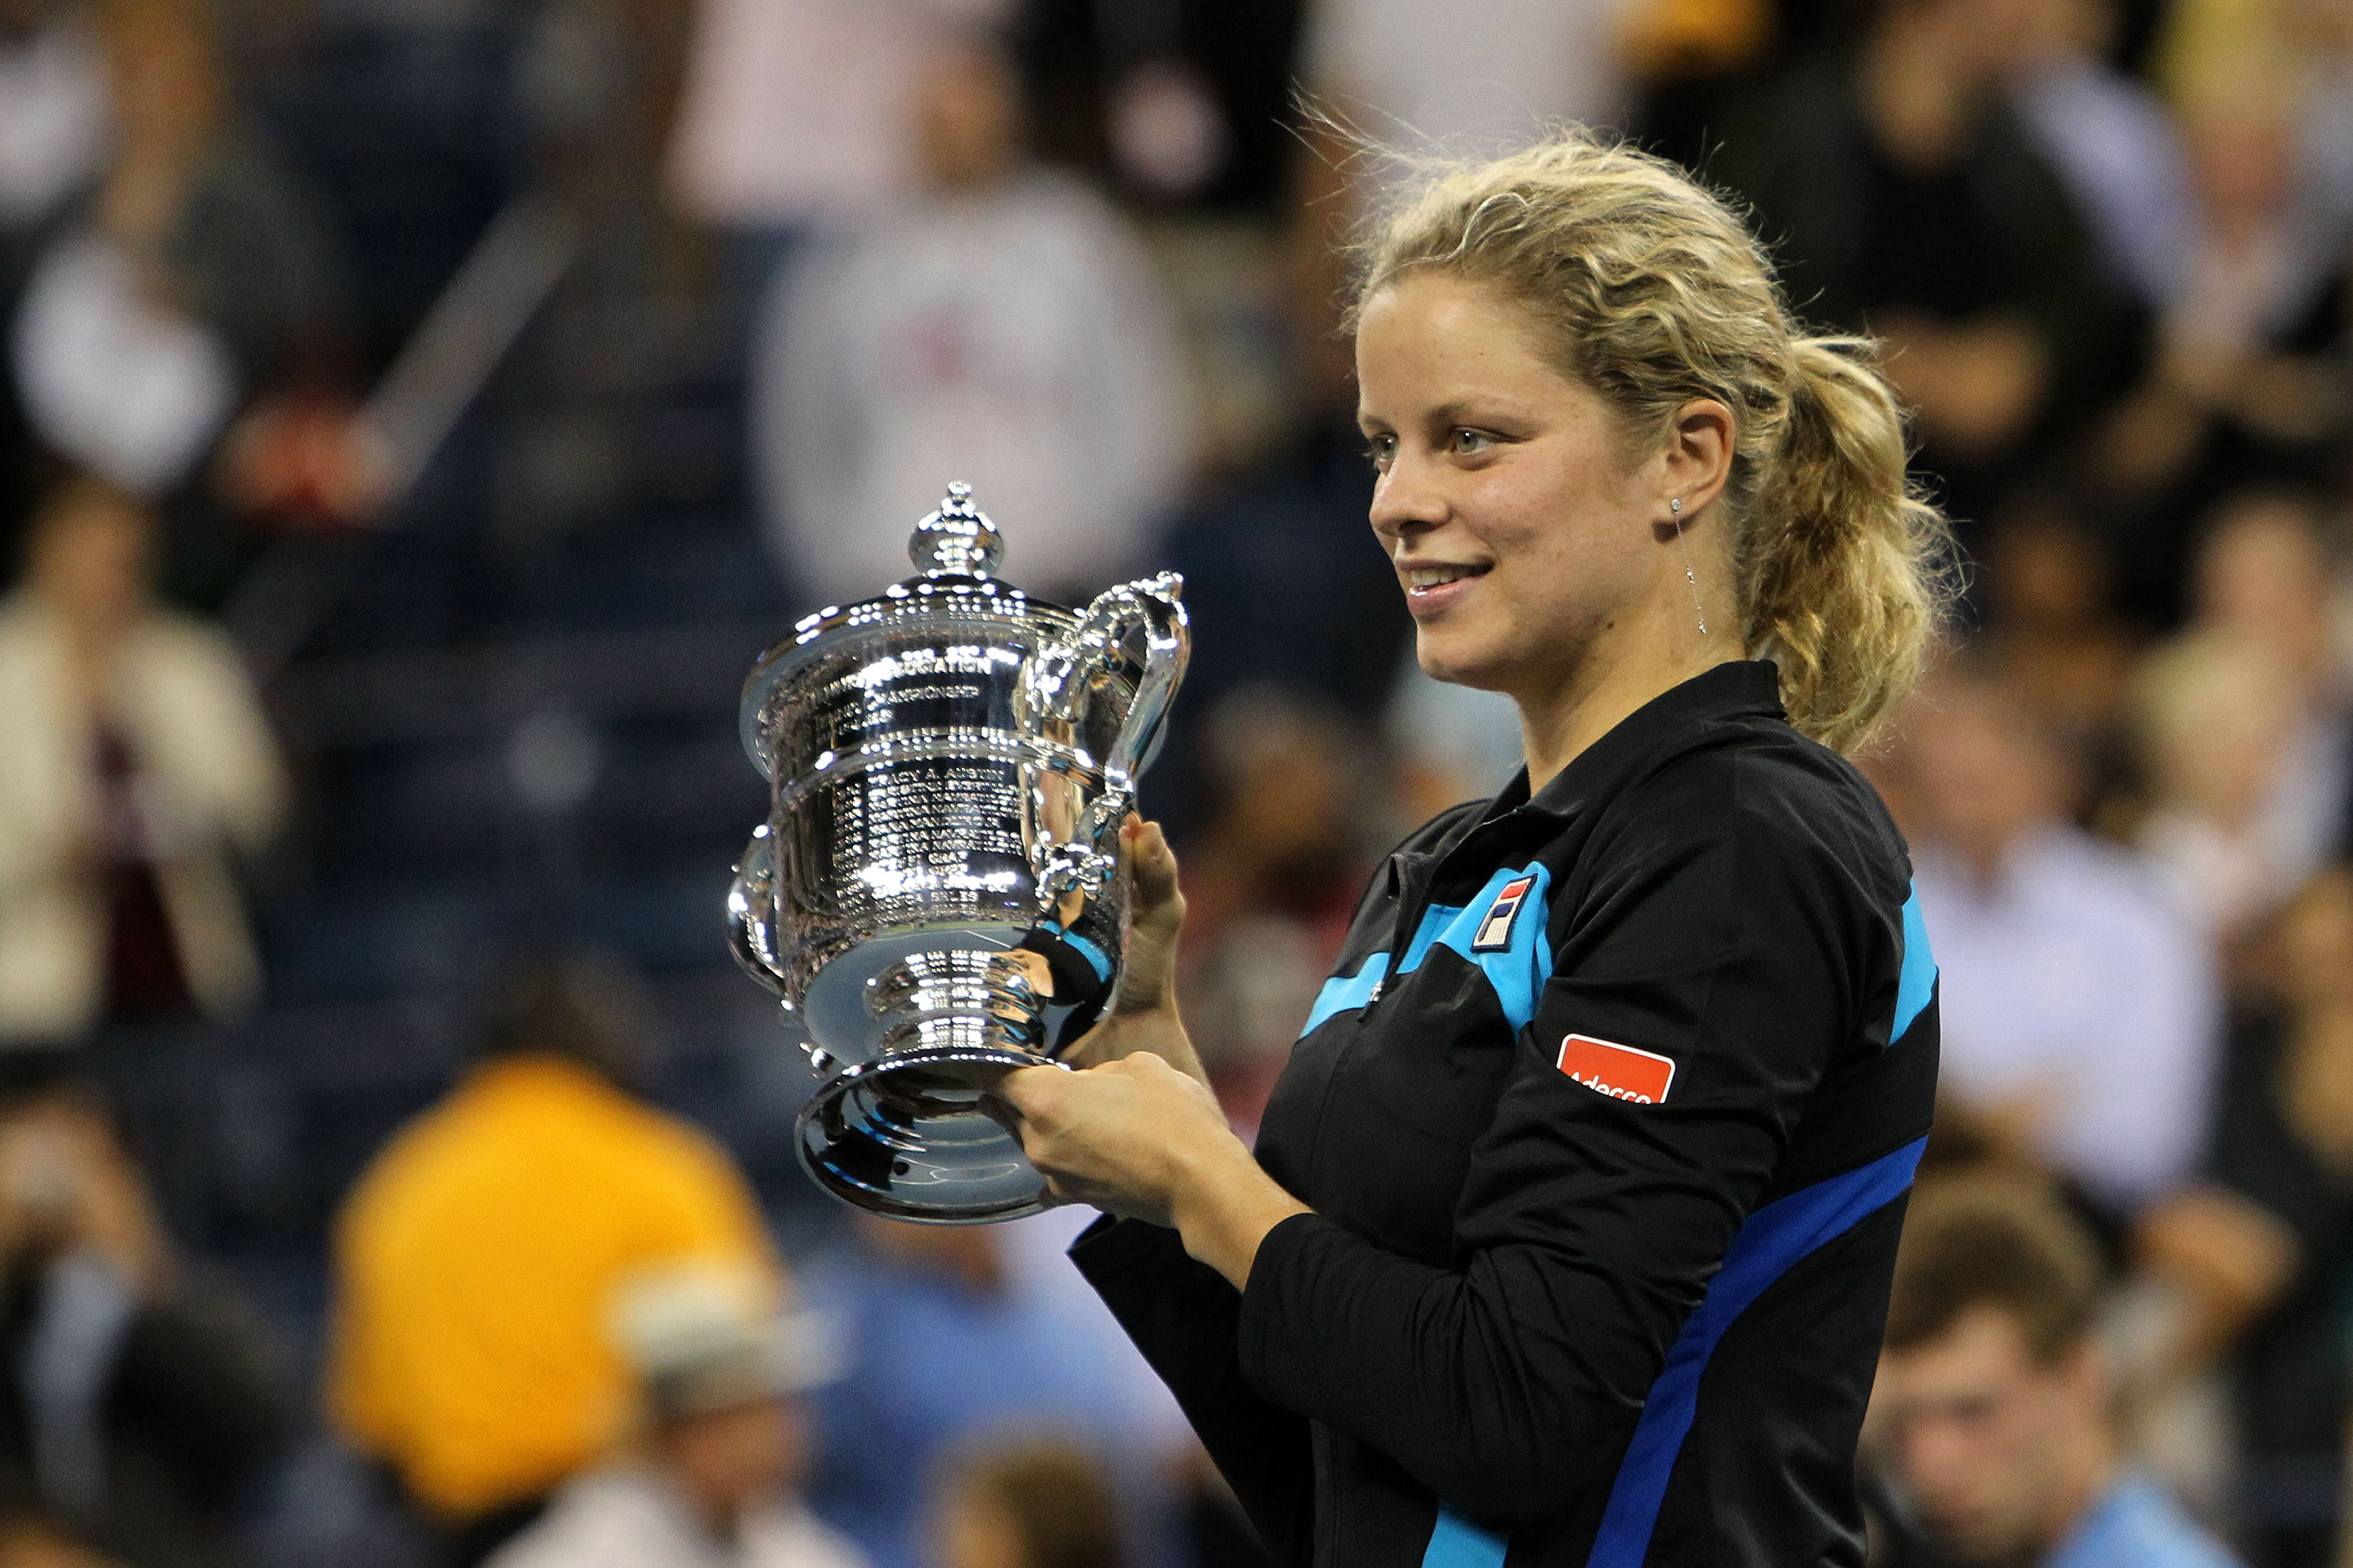 NEW YORK - SEPTEMBER 11:  Kim Clijsters of Belguim celebrates with the trophy after defeating Vera Zvonareva of Russia during their women's singles final on day thirteen of the 2010 U.S. Open at the USTA Billie Jean King National Tennis Center on Septembe